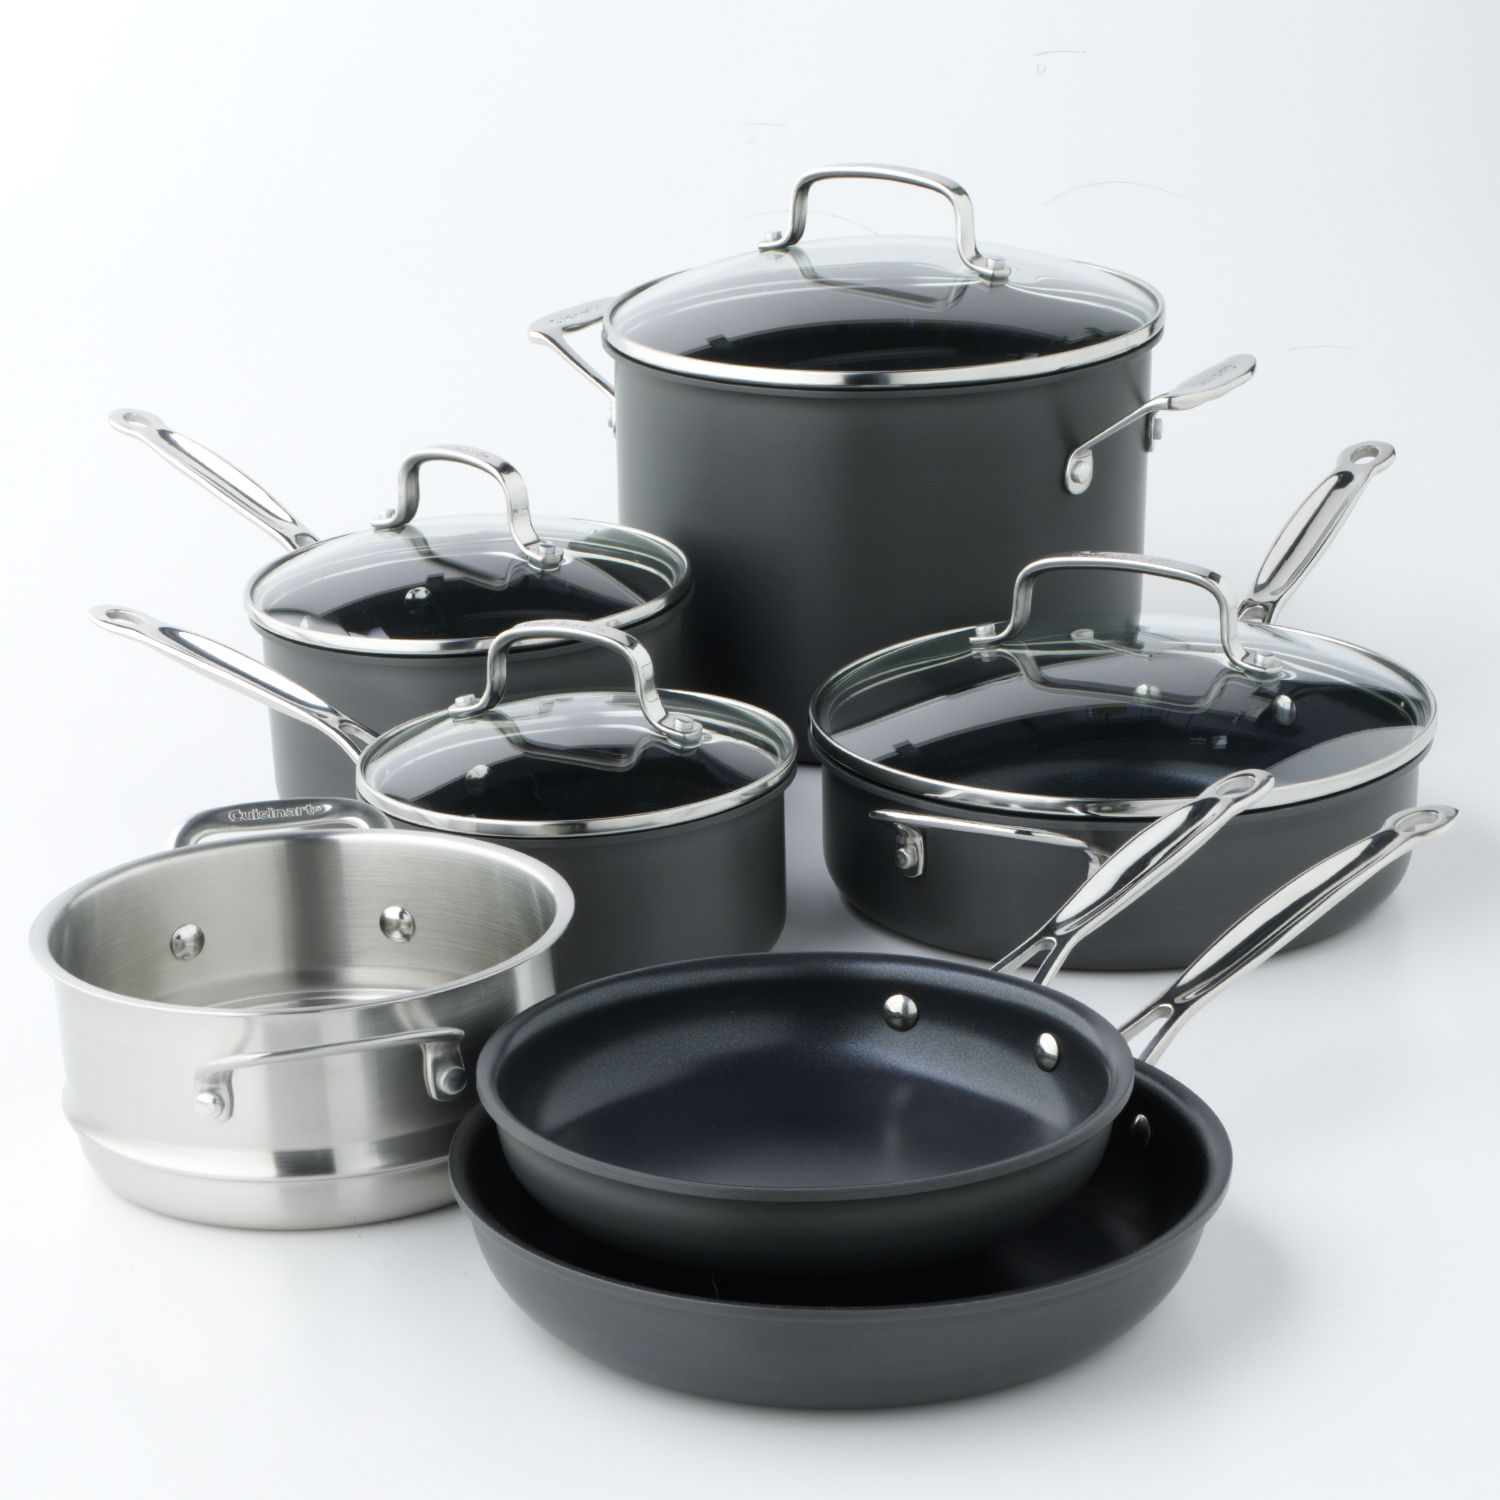 Circulon A1 Series With Scratchdefense Technology 8pc Nonstick Induction  Cookware Pots And Pans Set - Graphite : Target